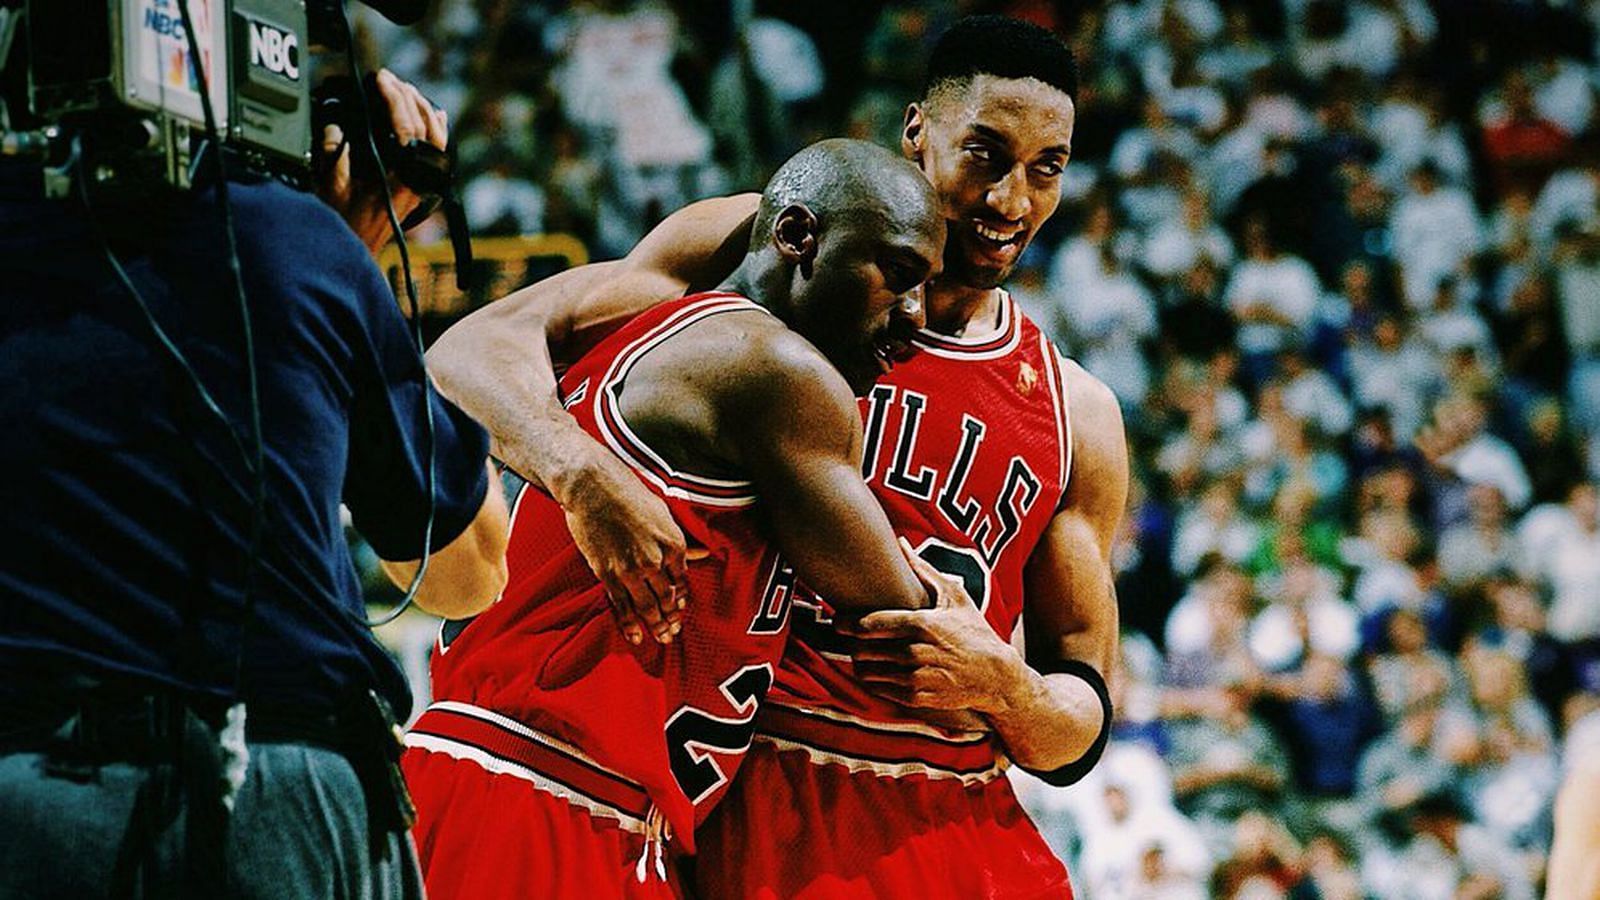 Michael Jordan being helpedoff the court by Scottie Pippen during the famous flu game [Photo: SB Nation]